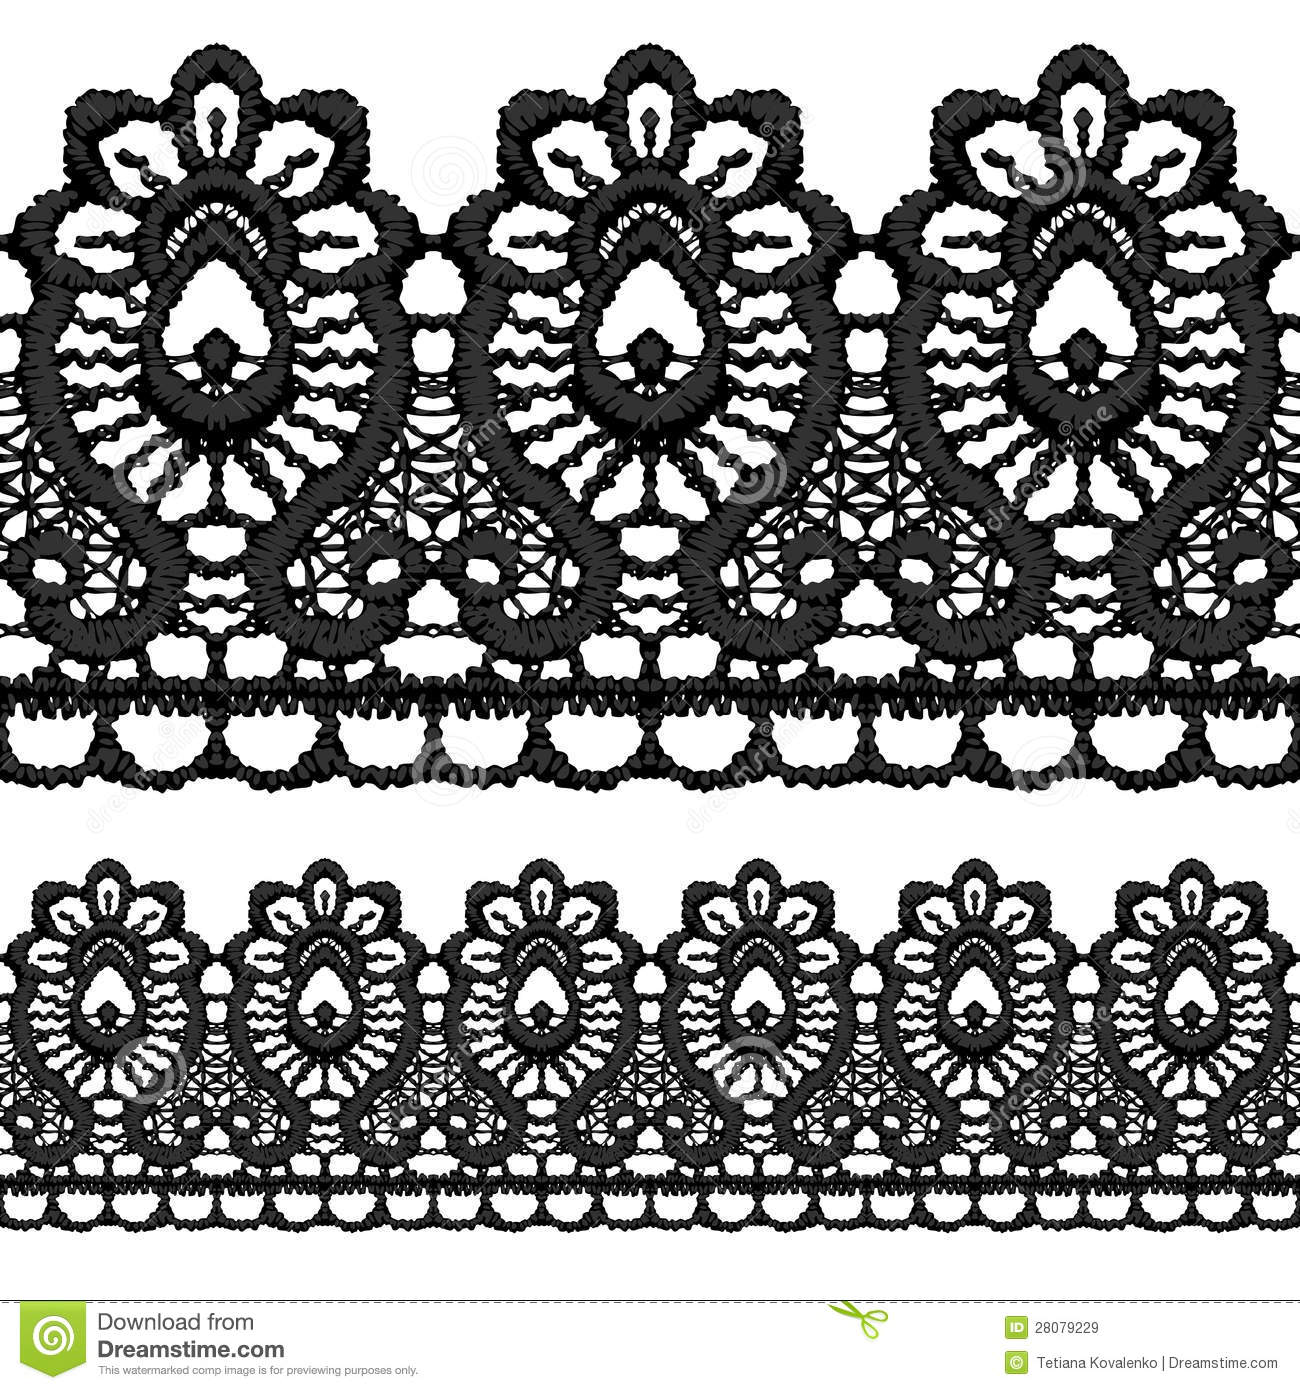 Black Openwork Lace Seamless Border  Royalty Free Stock Images   Image